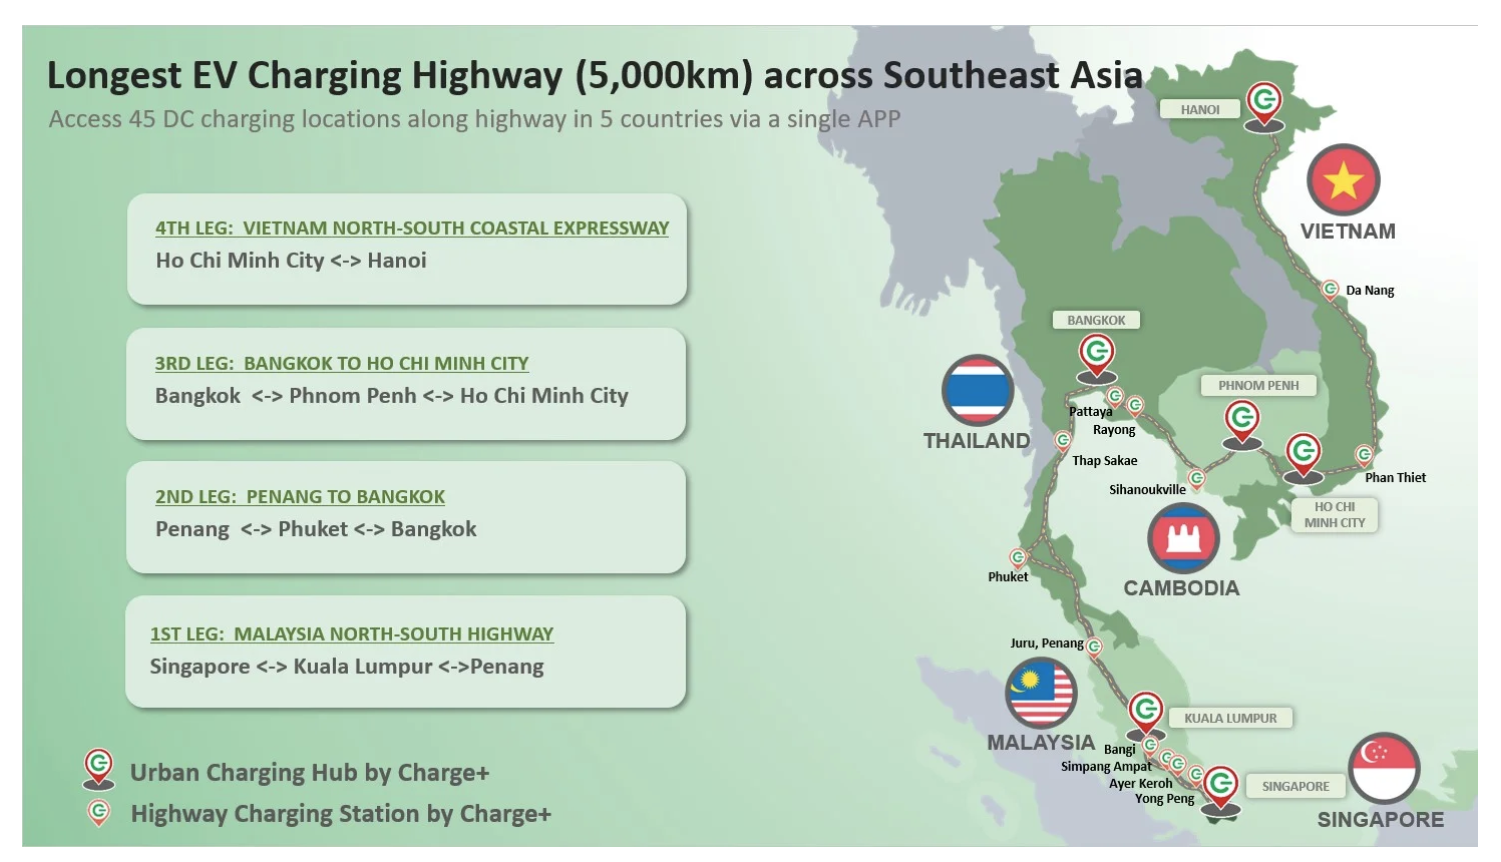 Charge+ to Install 3000-Mile Charging Highway Across Southeast Asia